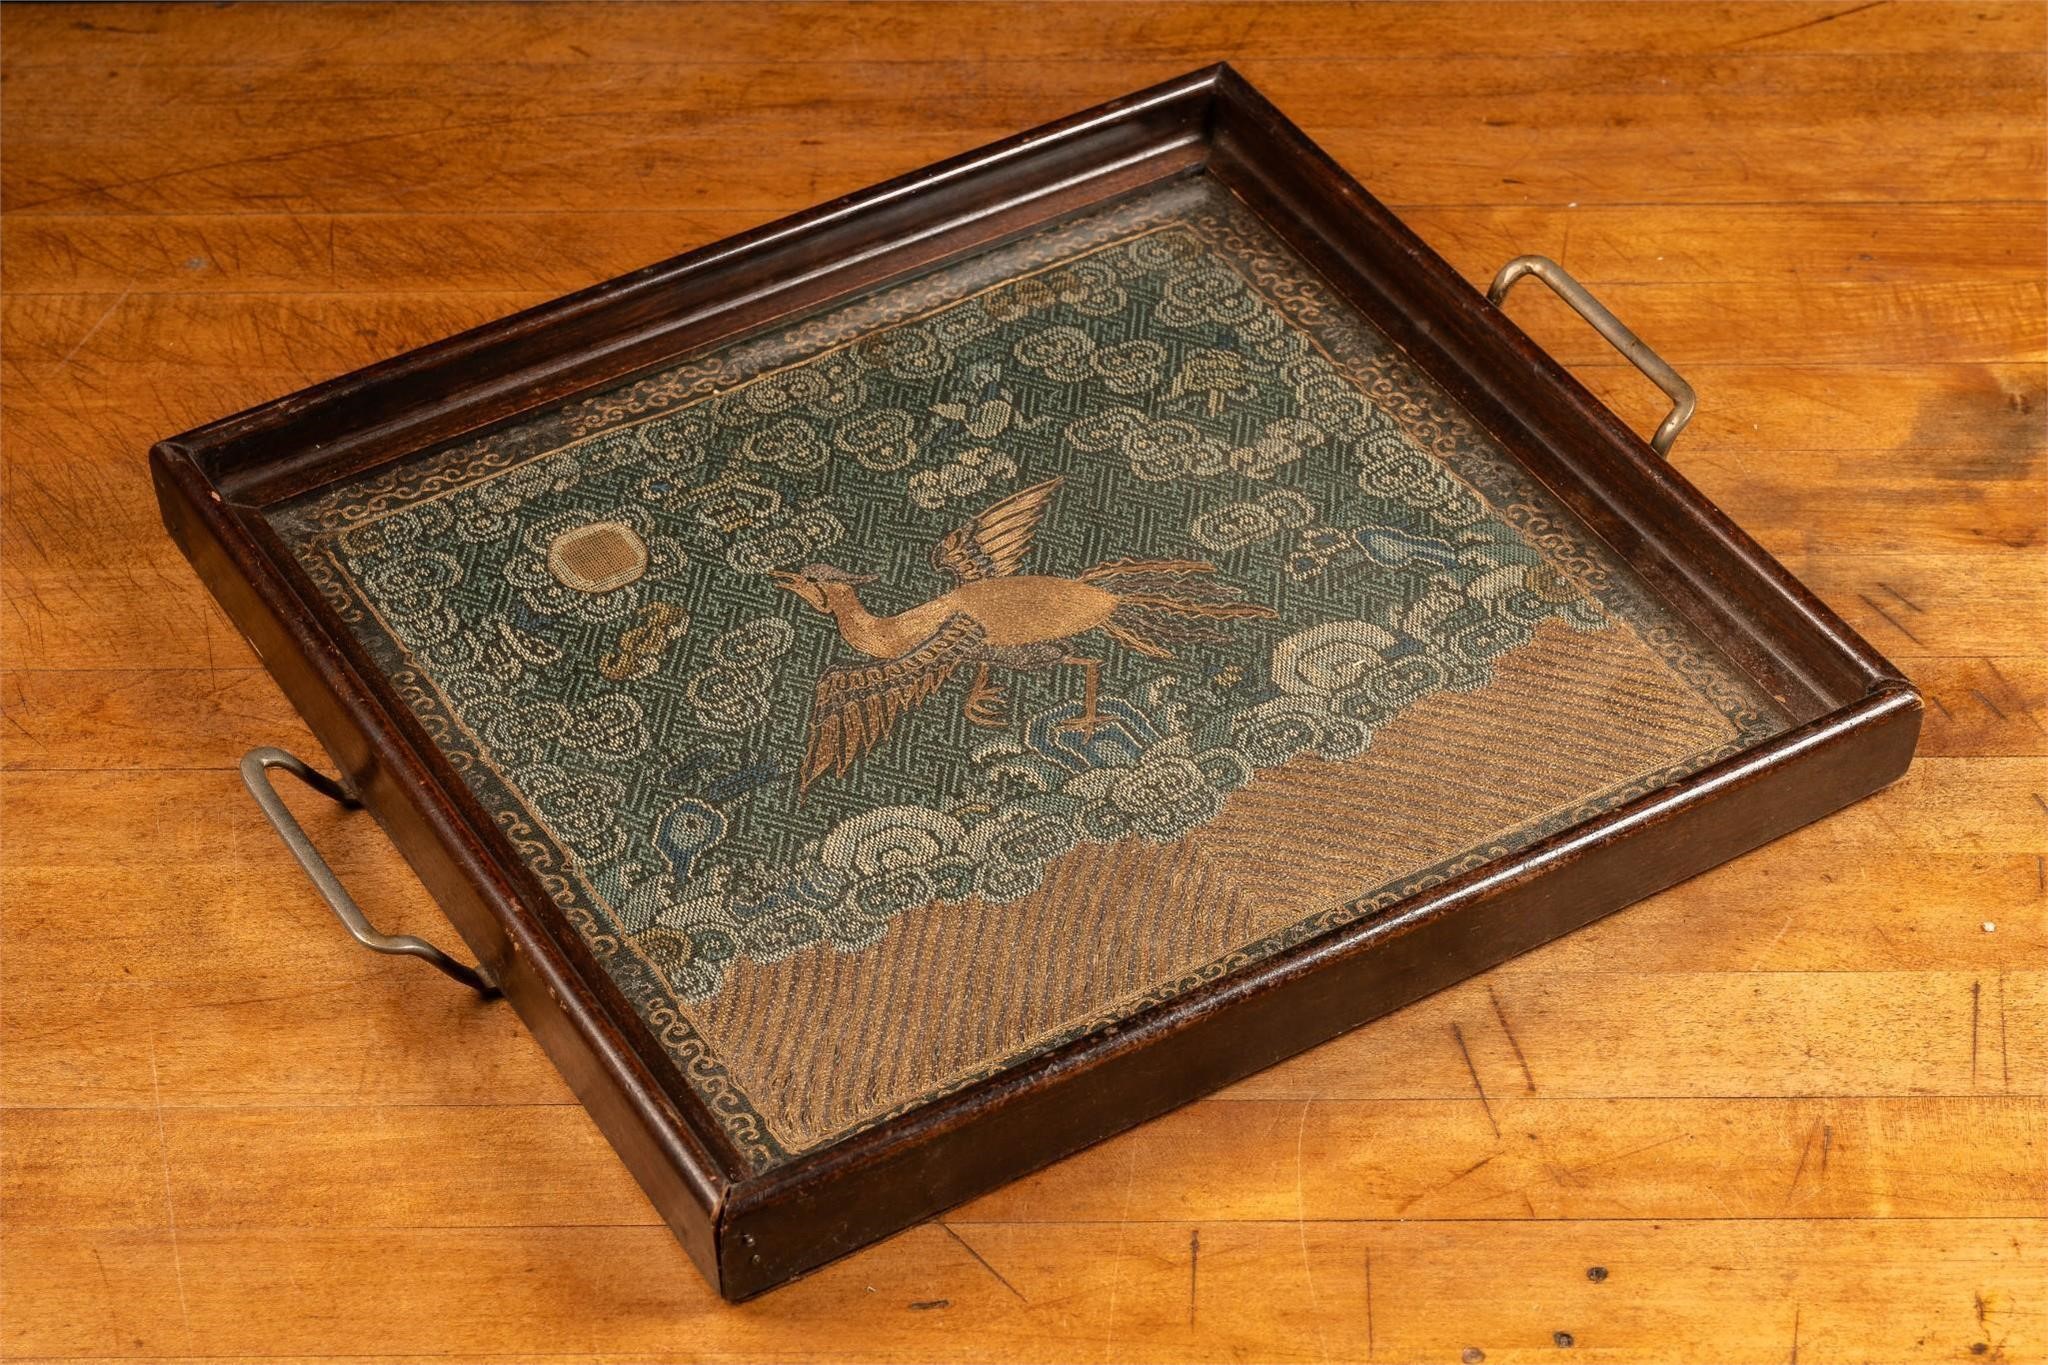 Antique Serving Tray with Embroidered Crane